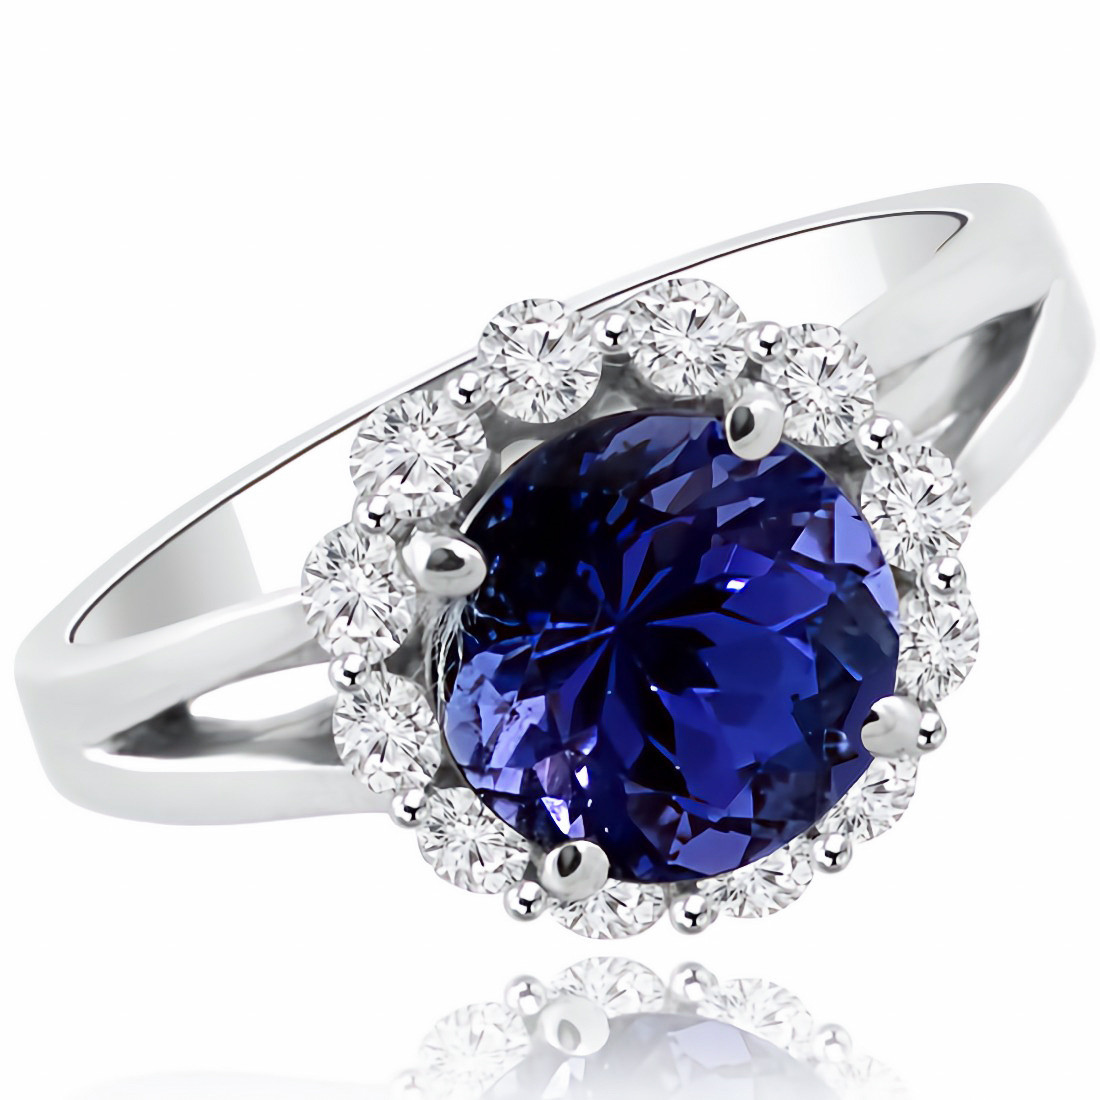 3ct Tanzanite Diamond Halo Engagement Ring with a Split Band